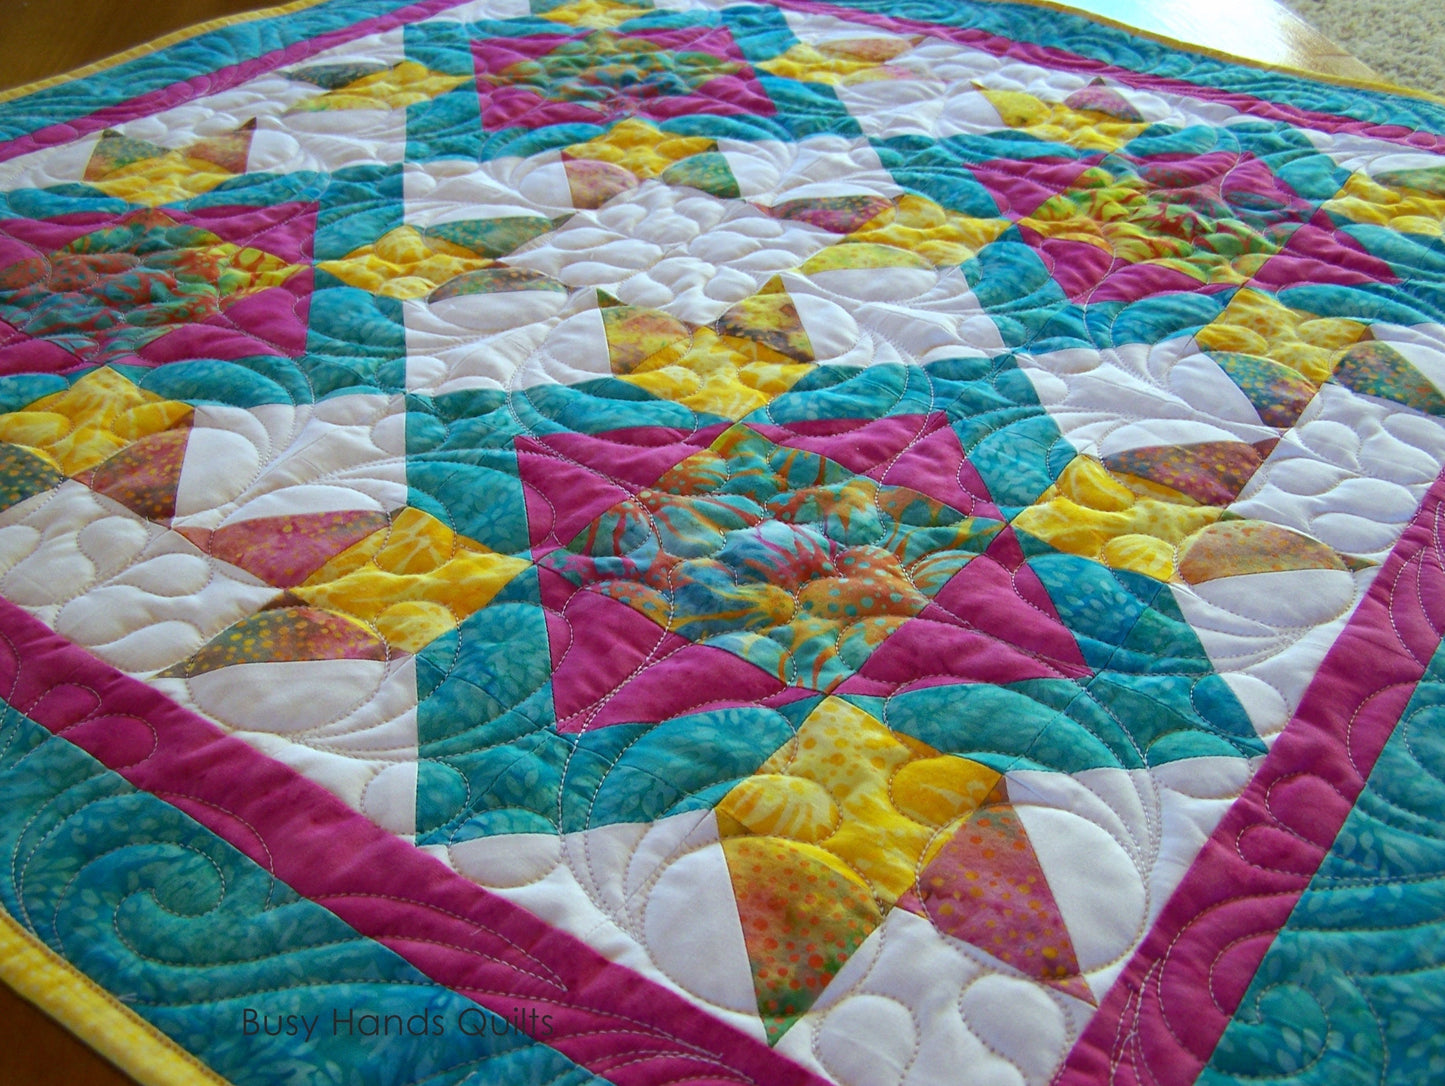 Diamond Dance Quilt Pattern PDF DOWNLOAD Busy Hands Quilts $12.99